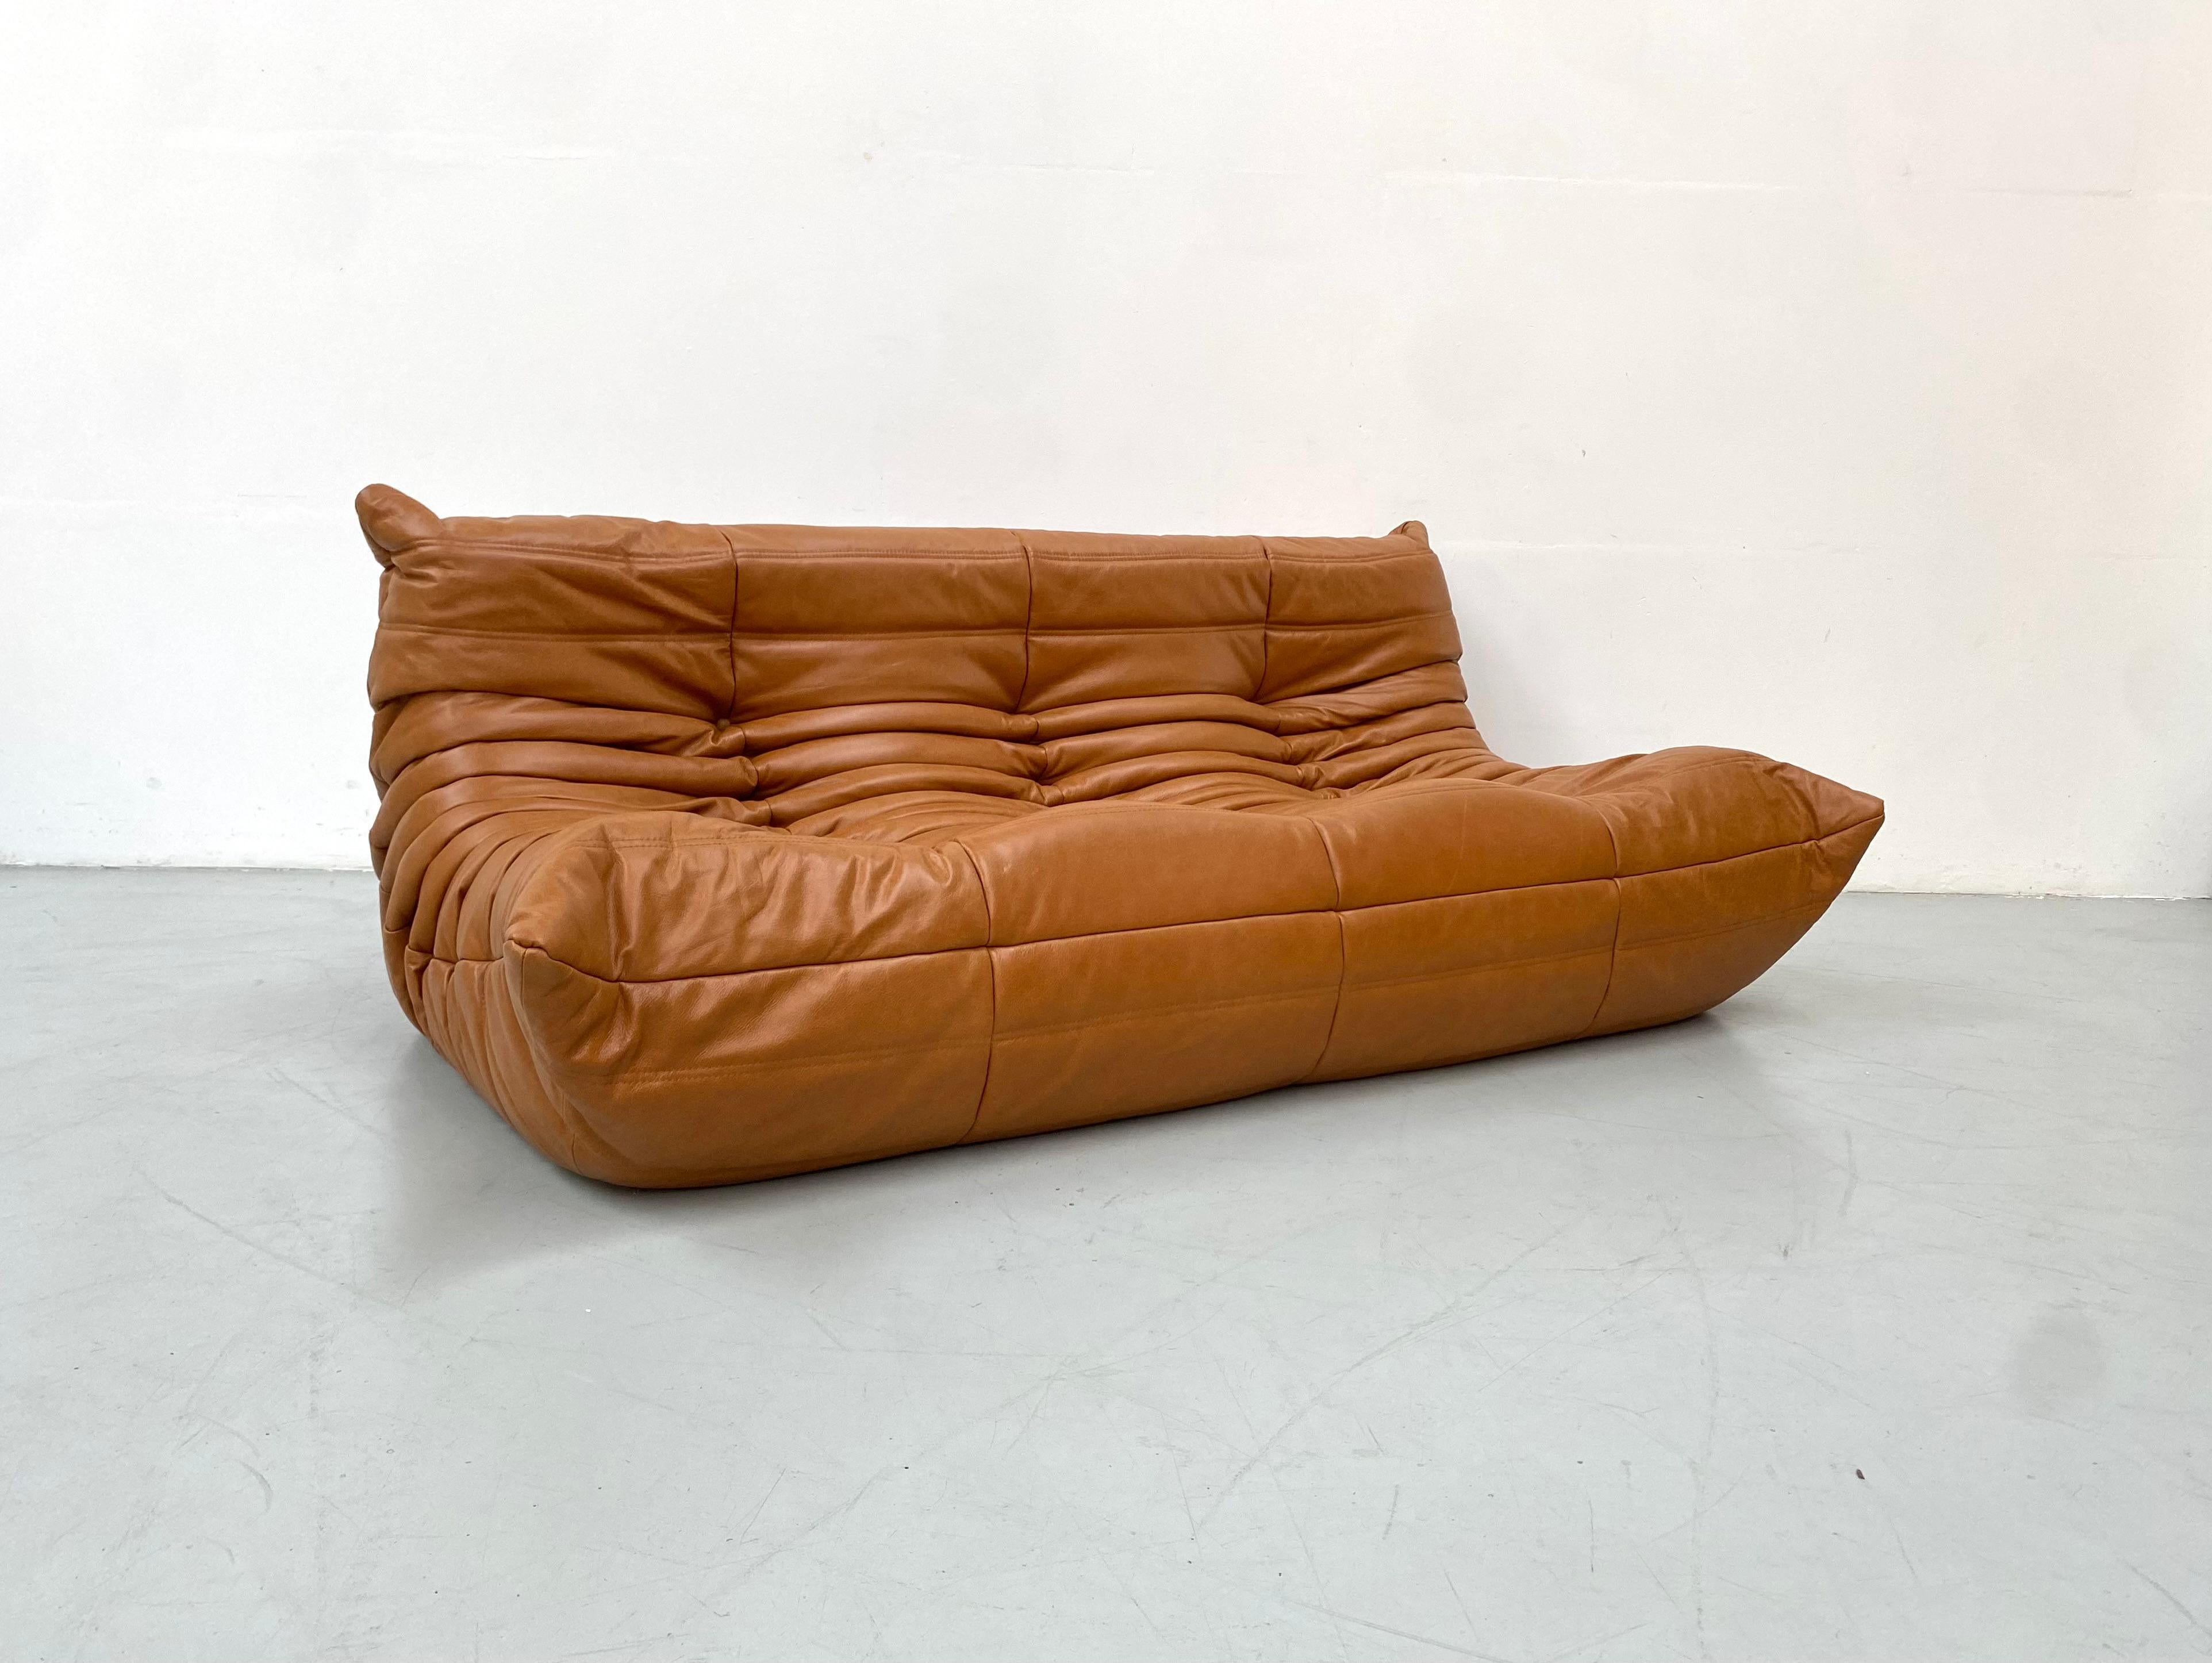 French Vintage Togo Sofa in Brown Leather by Michel Ducaroy for Ligne Roset. In Excellent Condition For Sale In Eindhoven, Noord Brabant